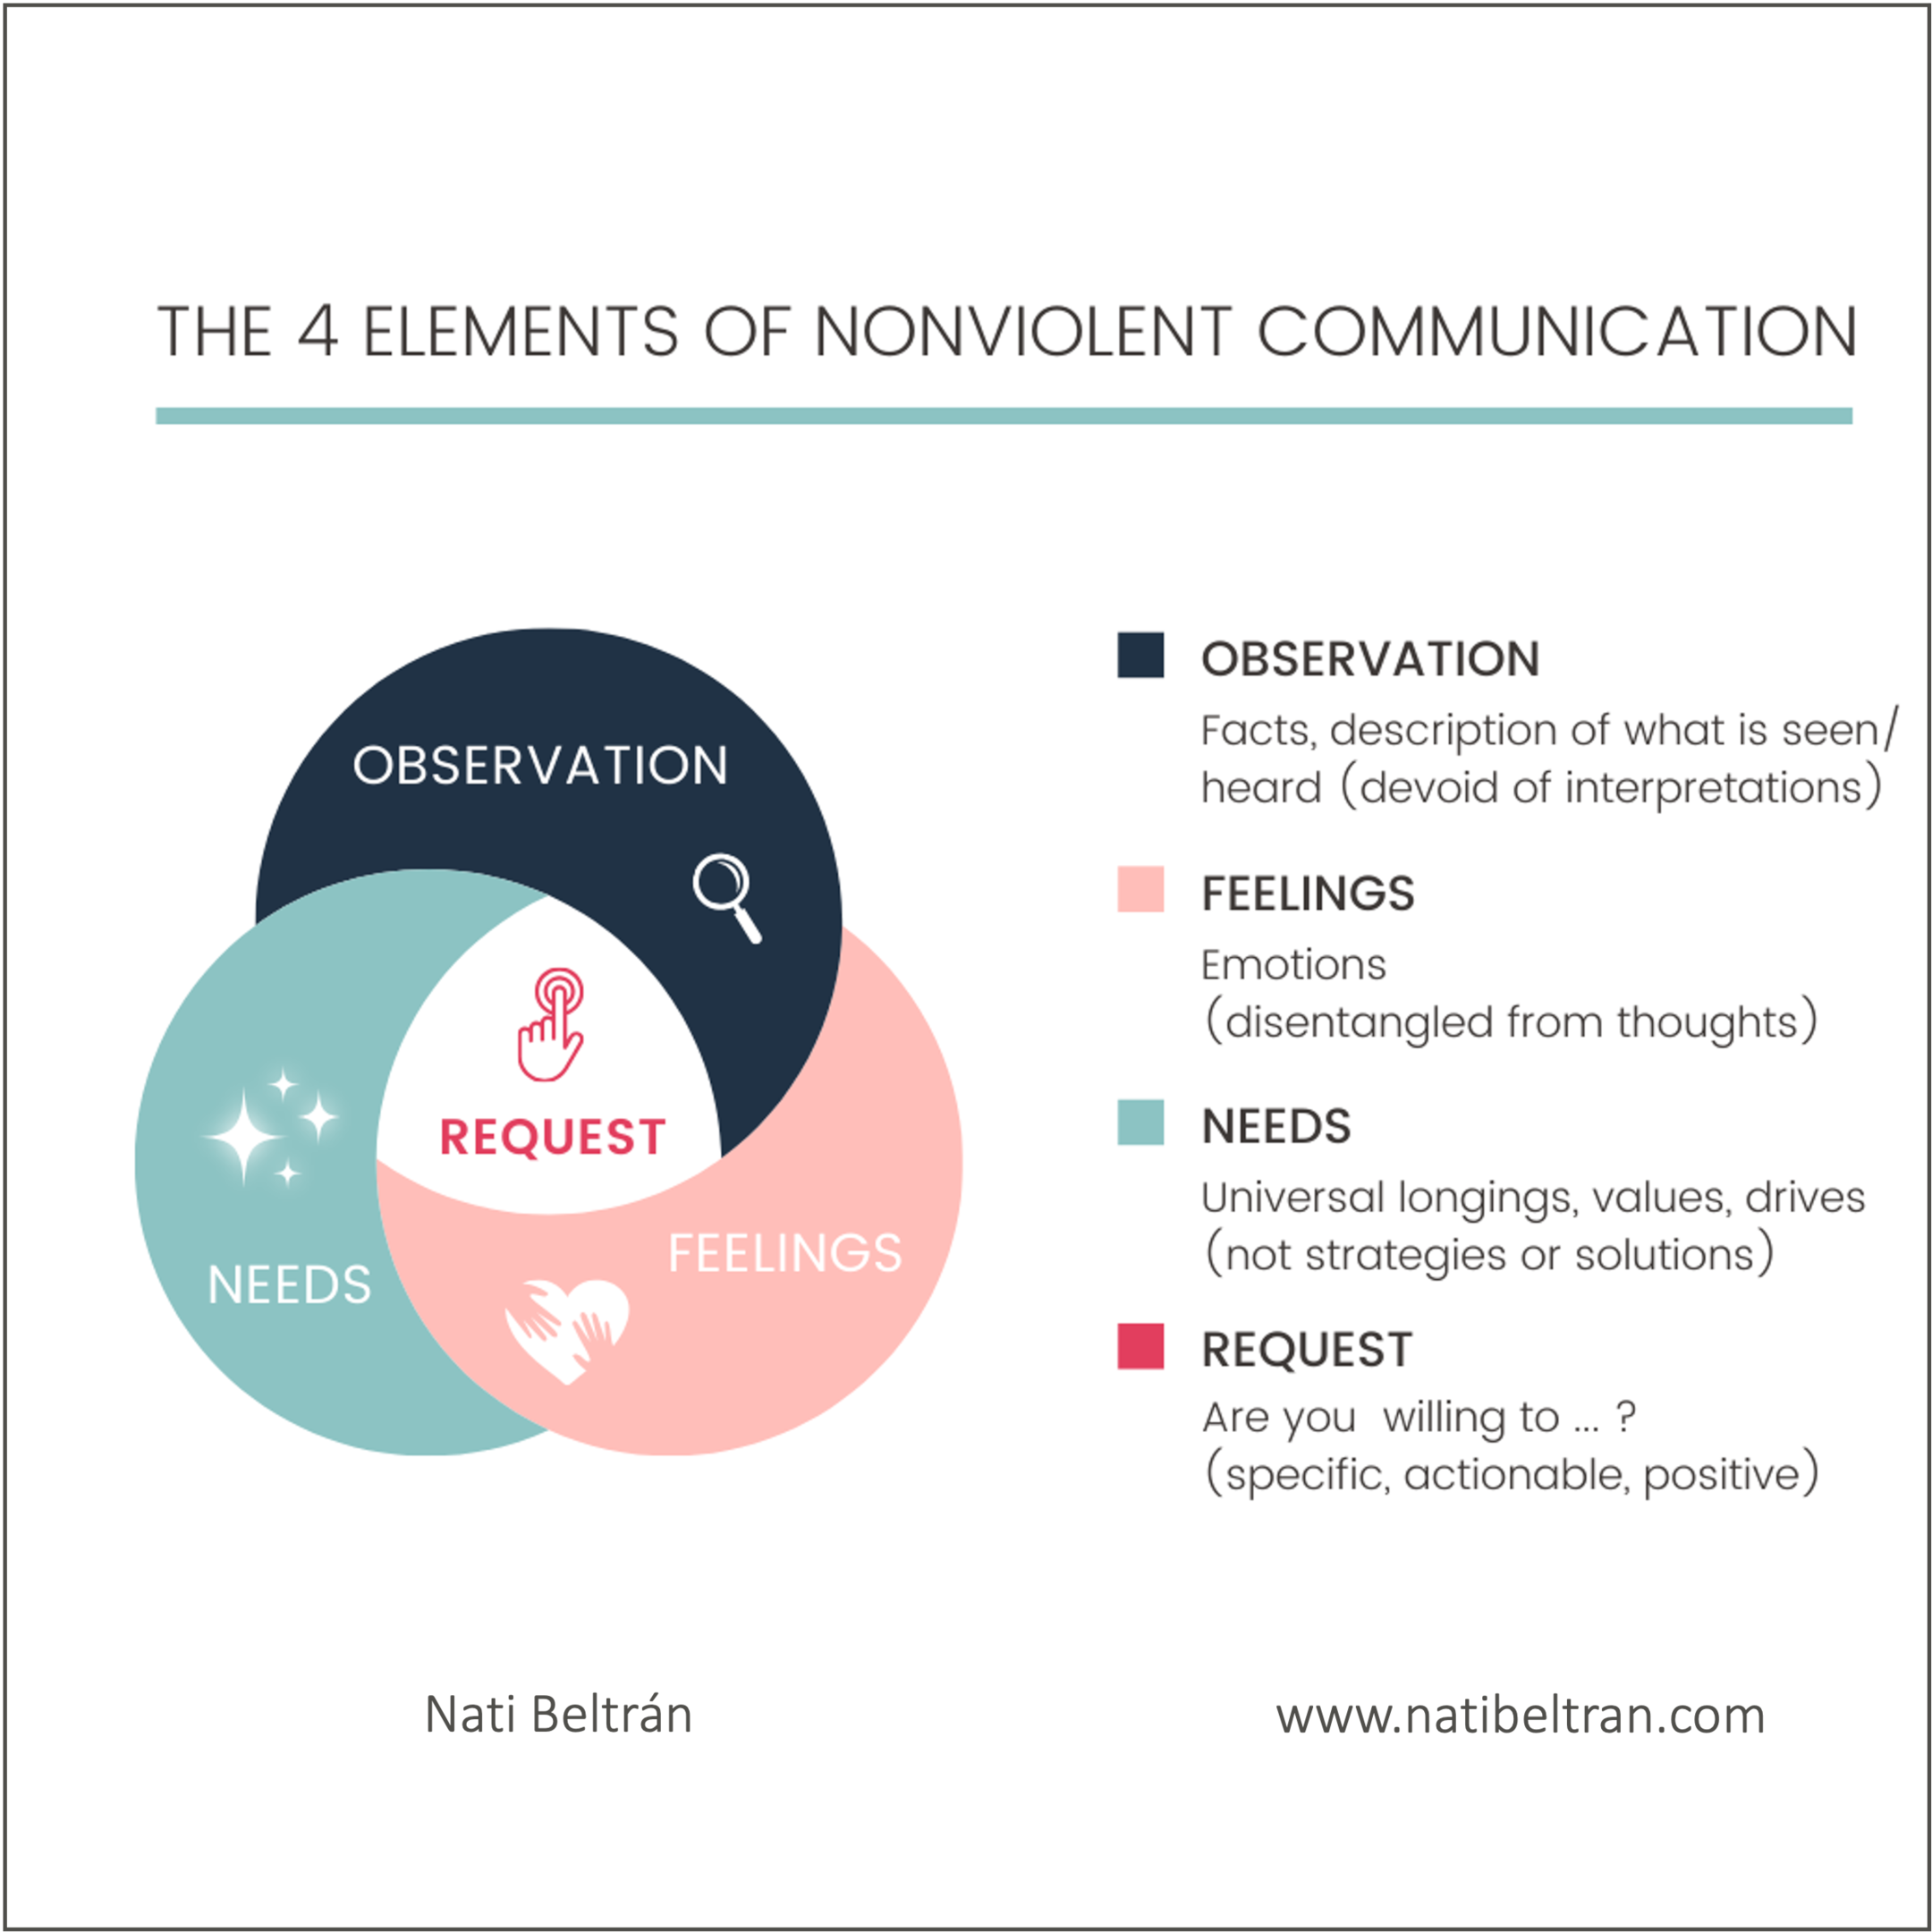 NVC has 4 elements we need to become clear on so that our communication is effective and responsible. 